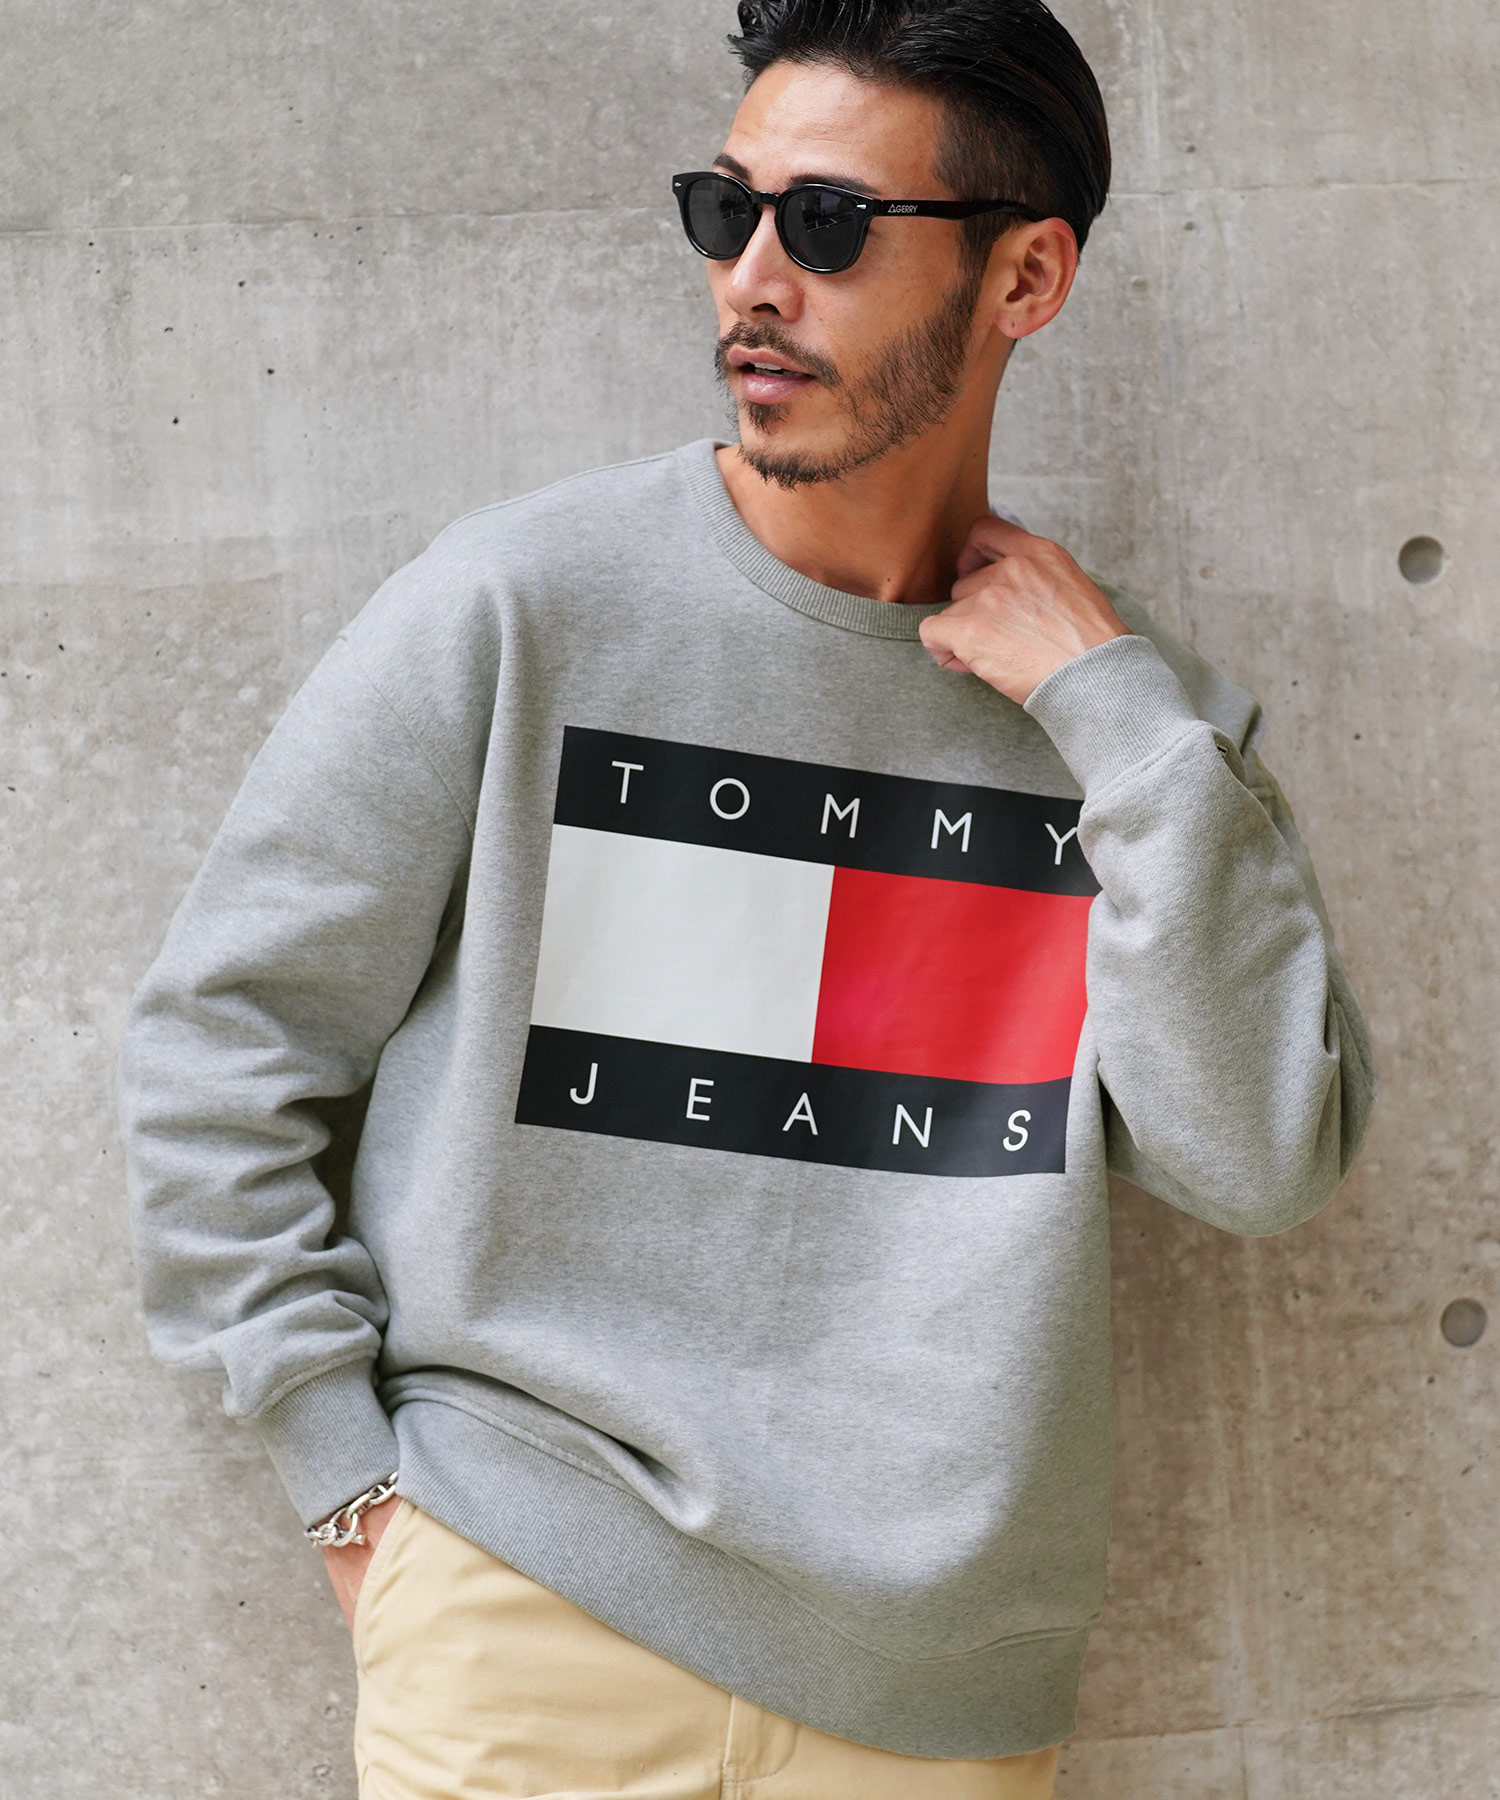 tommy jeans トレーナー - 通販 - pinehotel.info